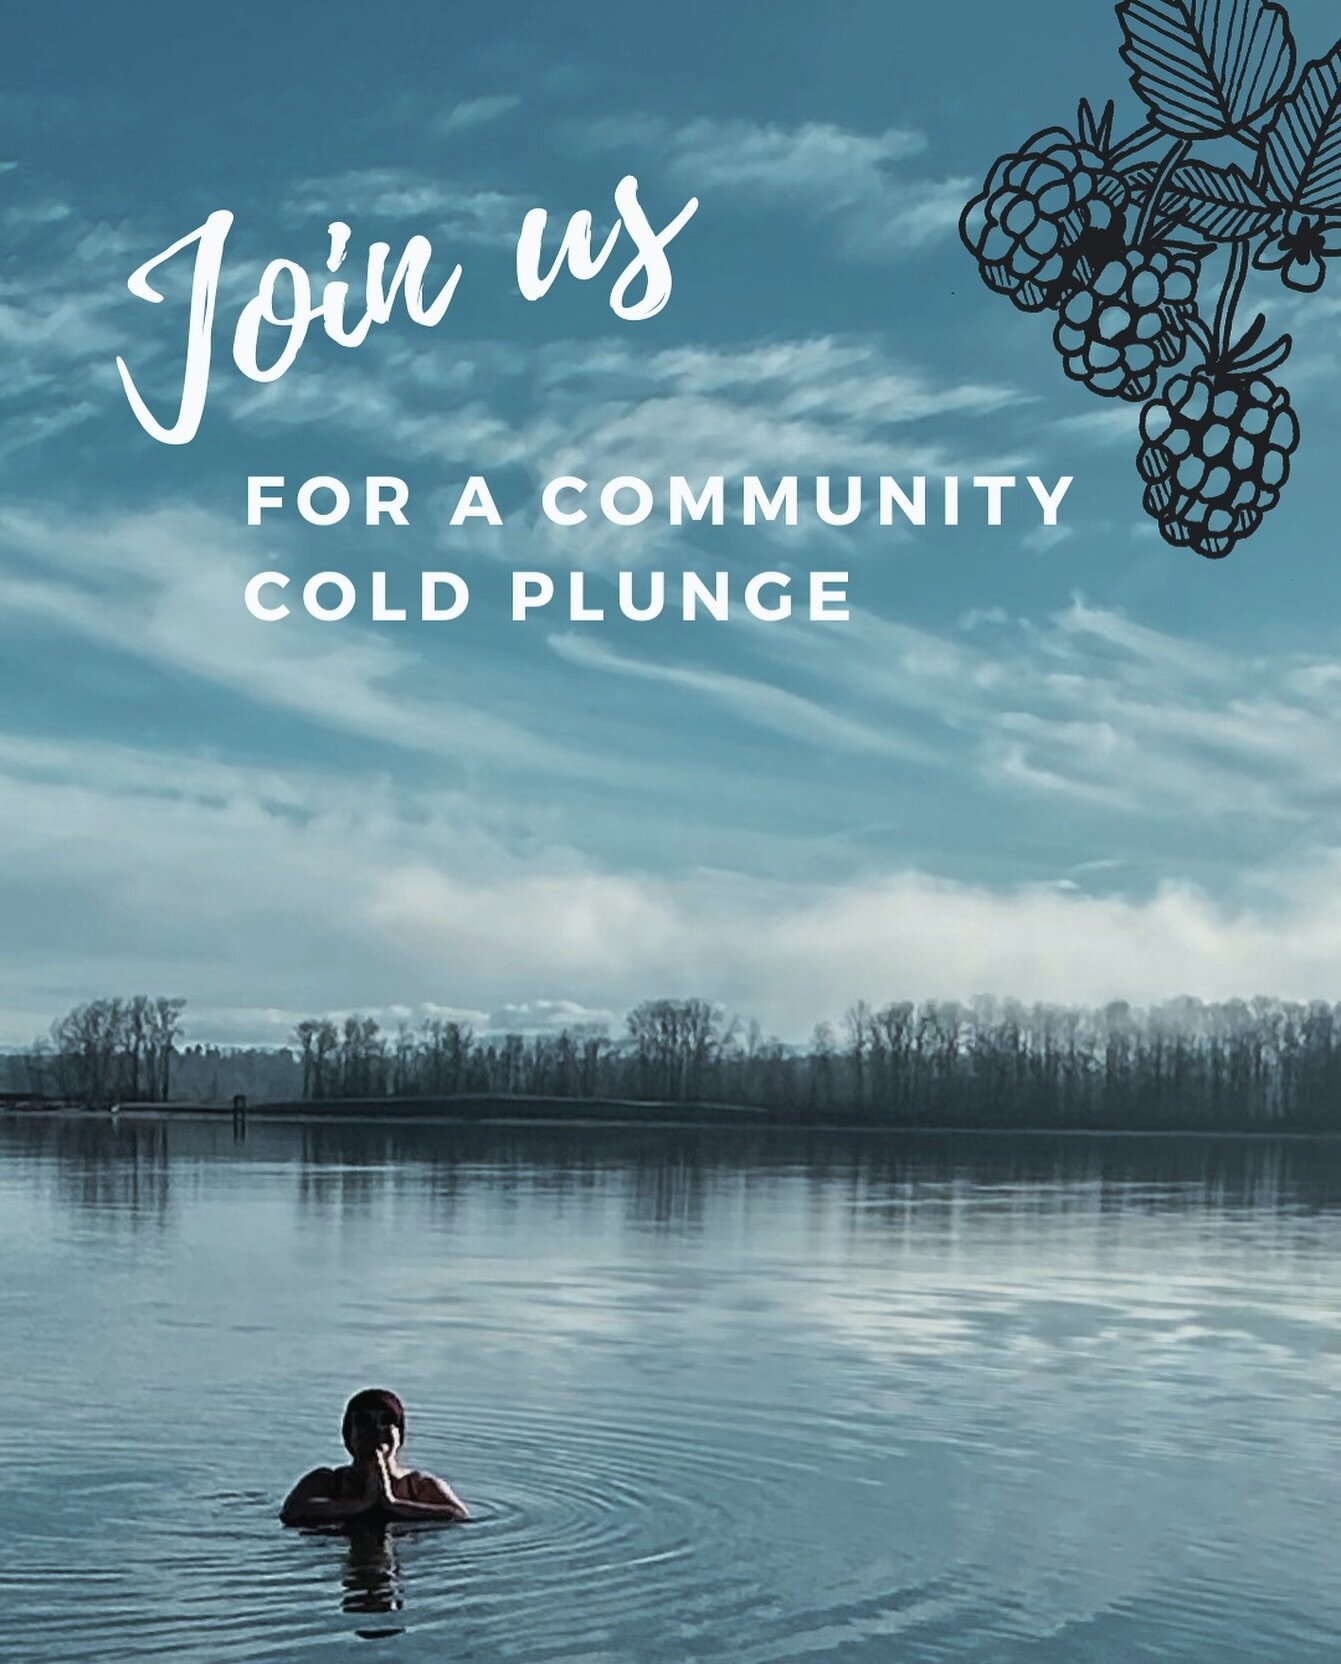 💧Tomorrow&rsquo;s the day! 💦Come join us at 10:00 AM for CHURCH: a Sauvie community cold plunge and warm shrub tea! Meet at Willow Bar Beach here on the Island! Can&rsquo;t wait to get in the cold water with you friends! 
&bull;
RSVP via the link i